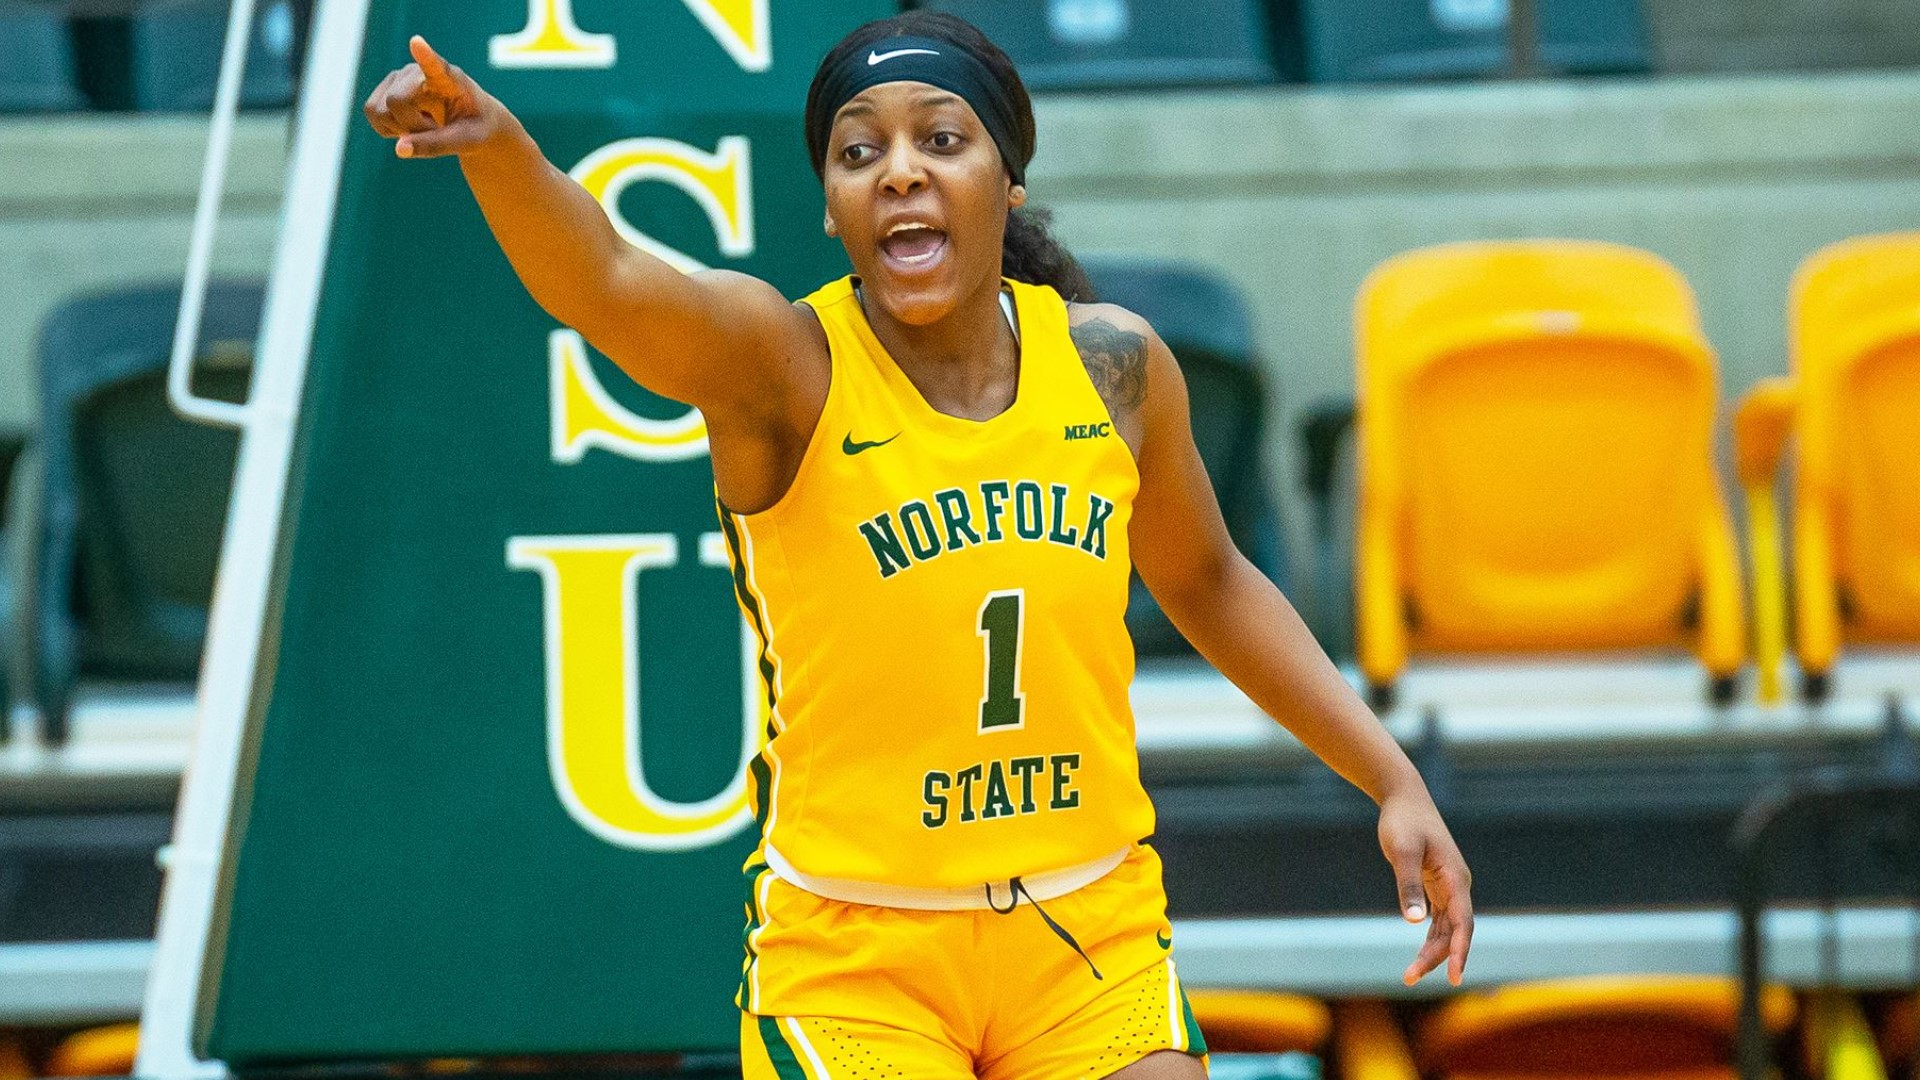 Norfolk State went on a 14-3 run to finish the half with five points each from senior Armani Franklin and junior Jaylynn Holmes.